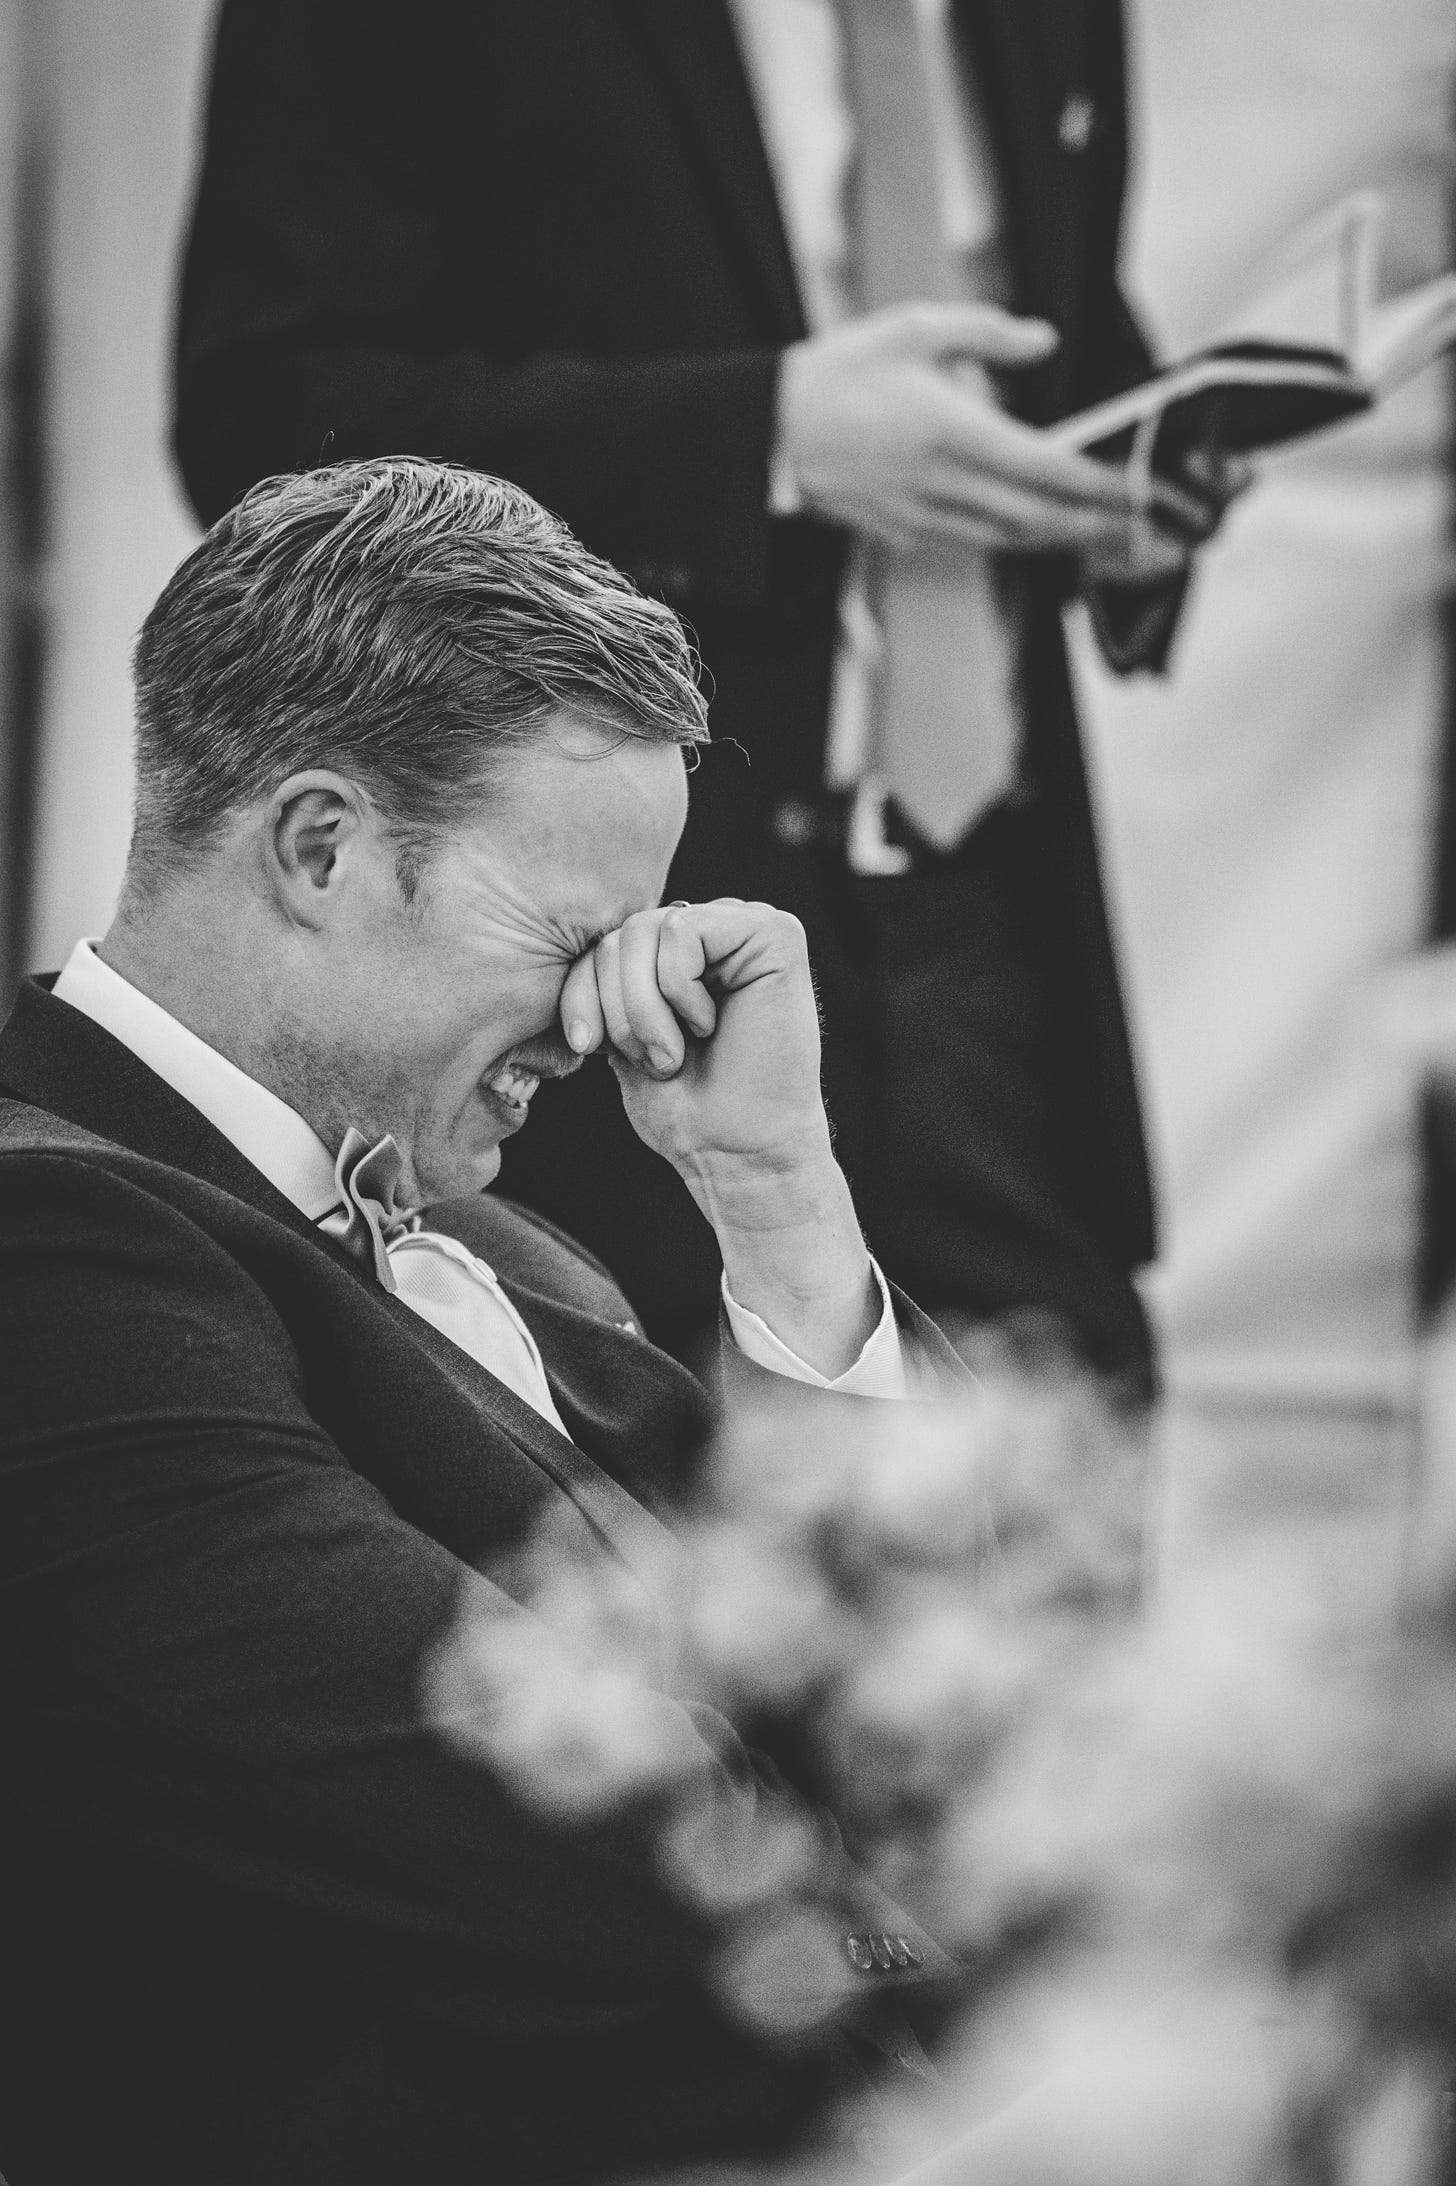 A groom laughing while his bestman gives a speech